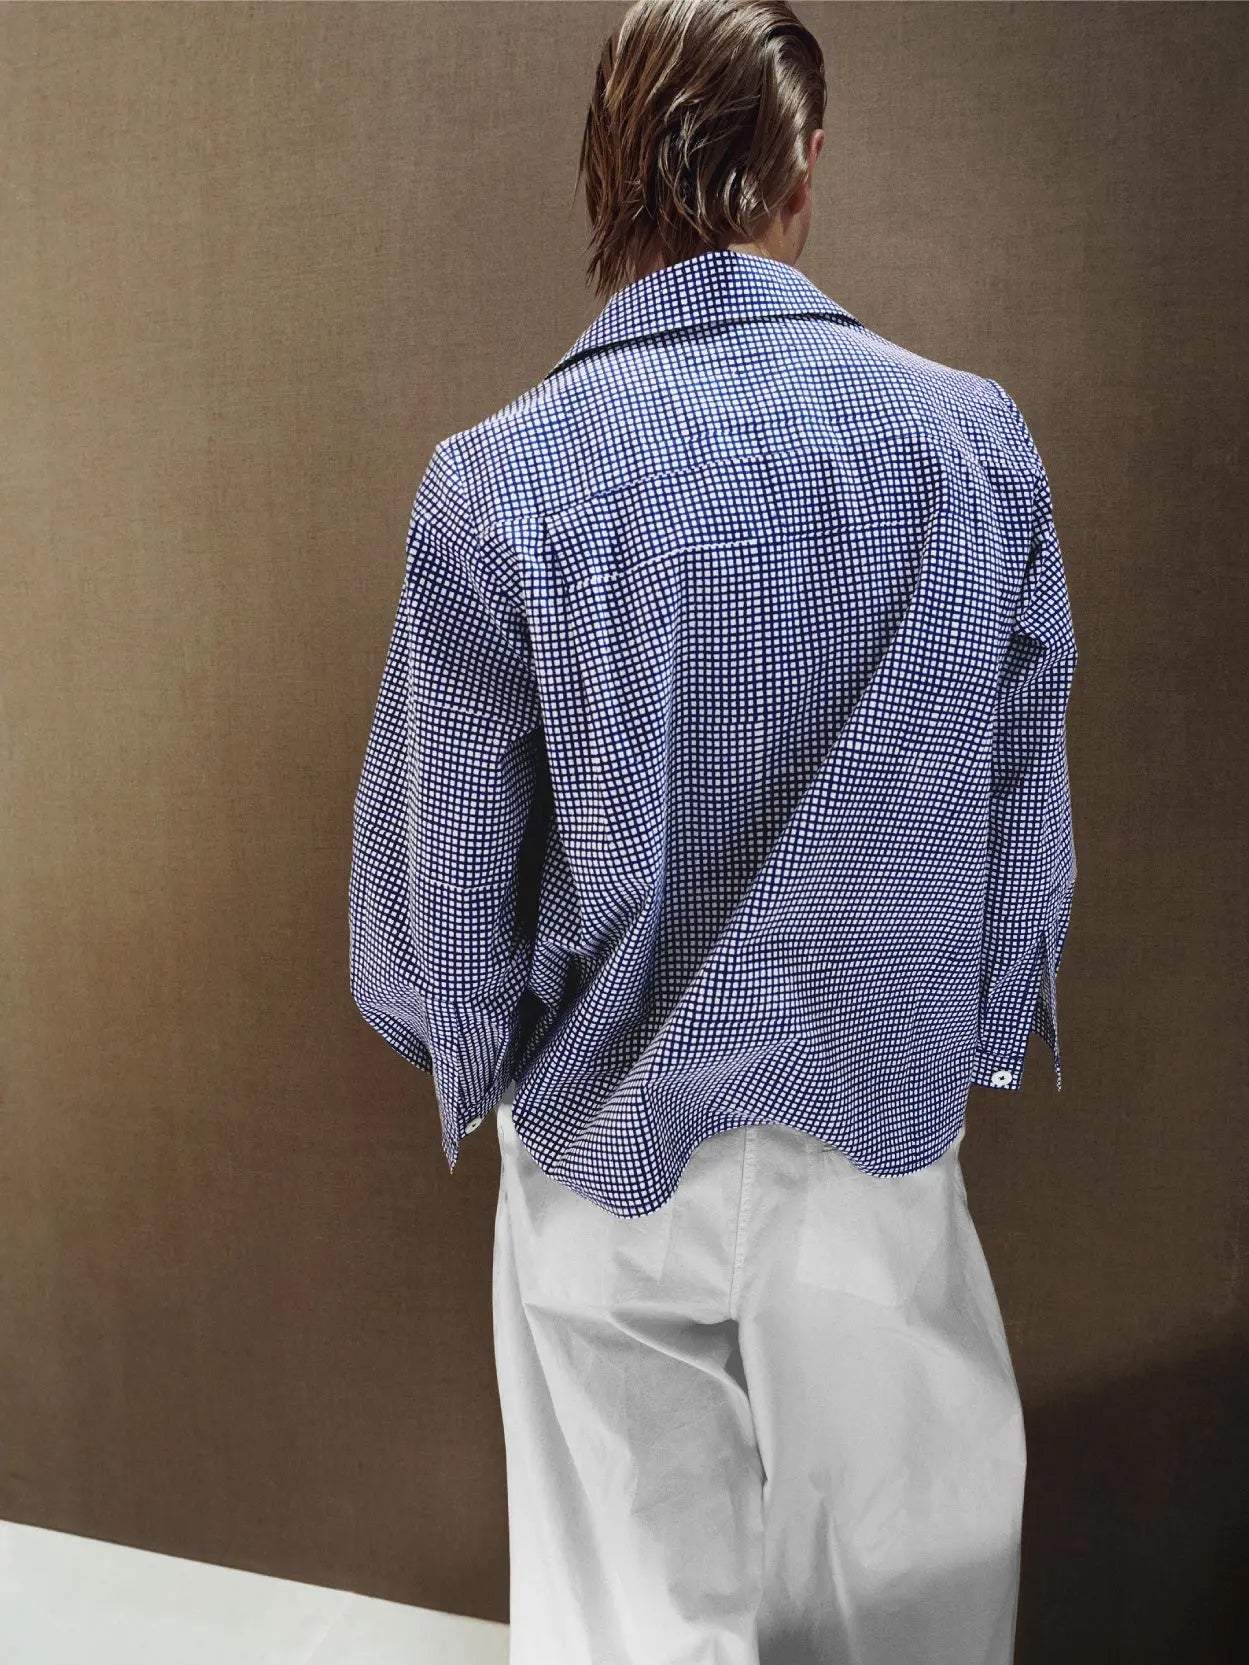 A Jan Machenhauer Kika Shirt Block Print Check with a collar and six white buttons down the front. The shirt, available at bassalstore in Barcelona, features a straight hem and is neatly spread out, viewed from the front against a plain white background.